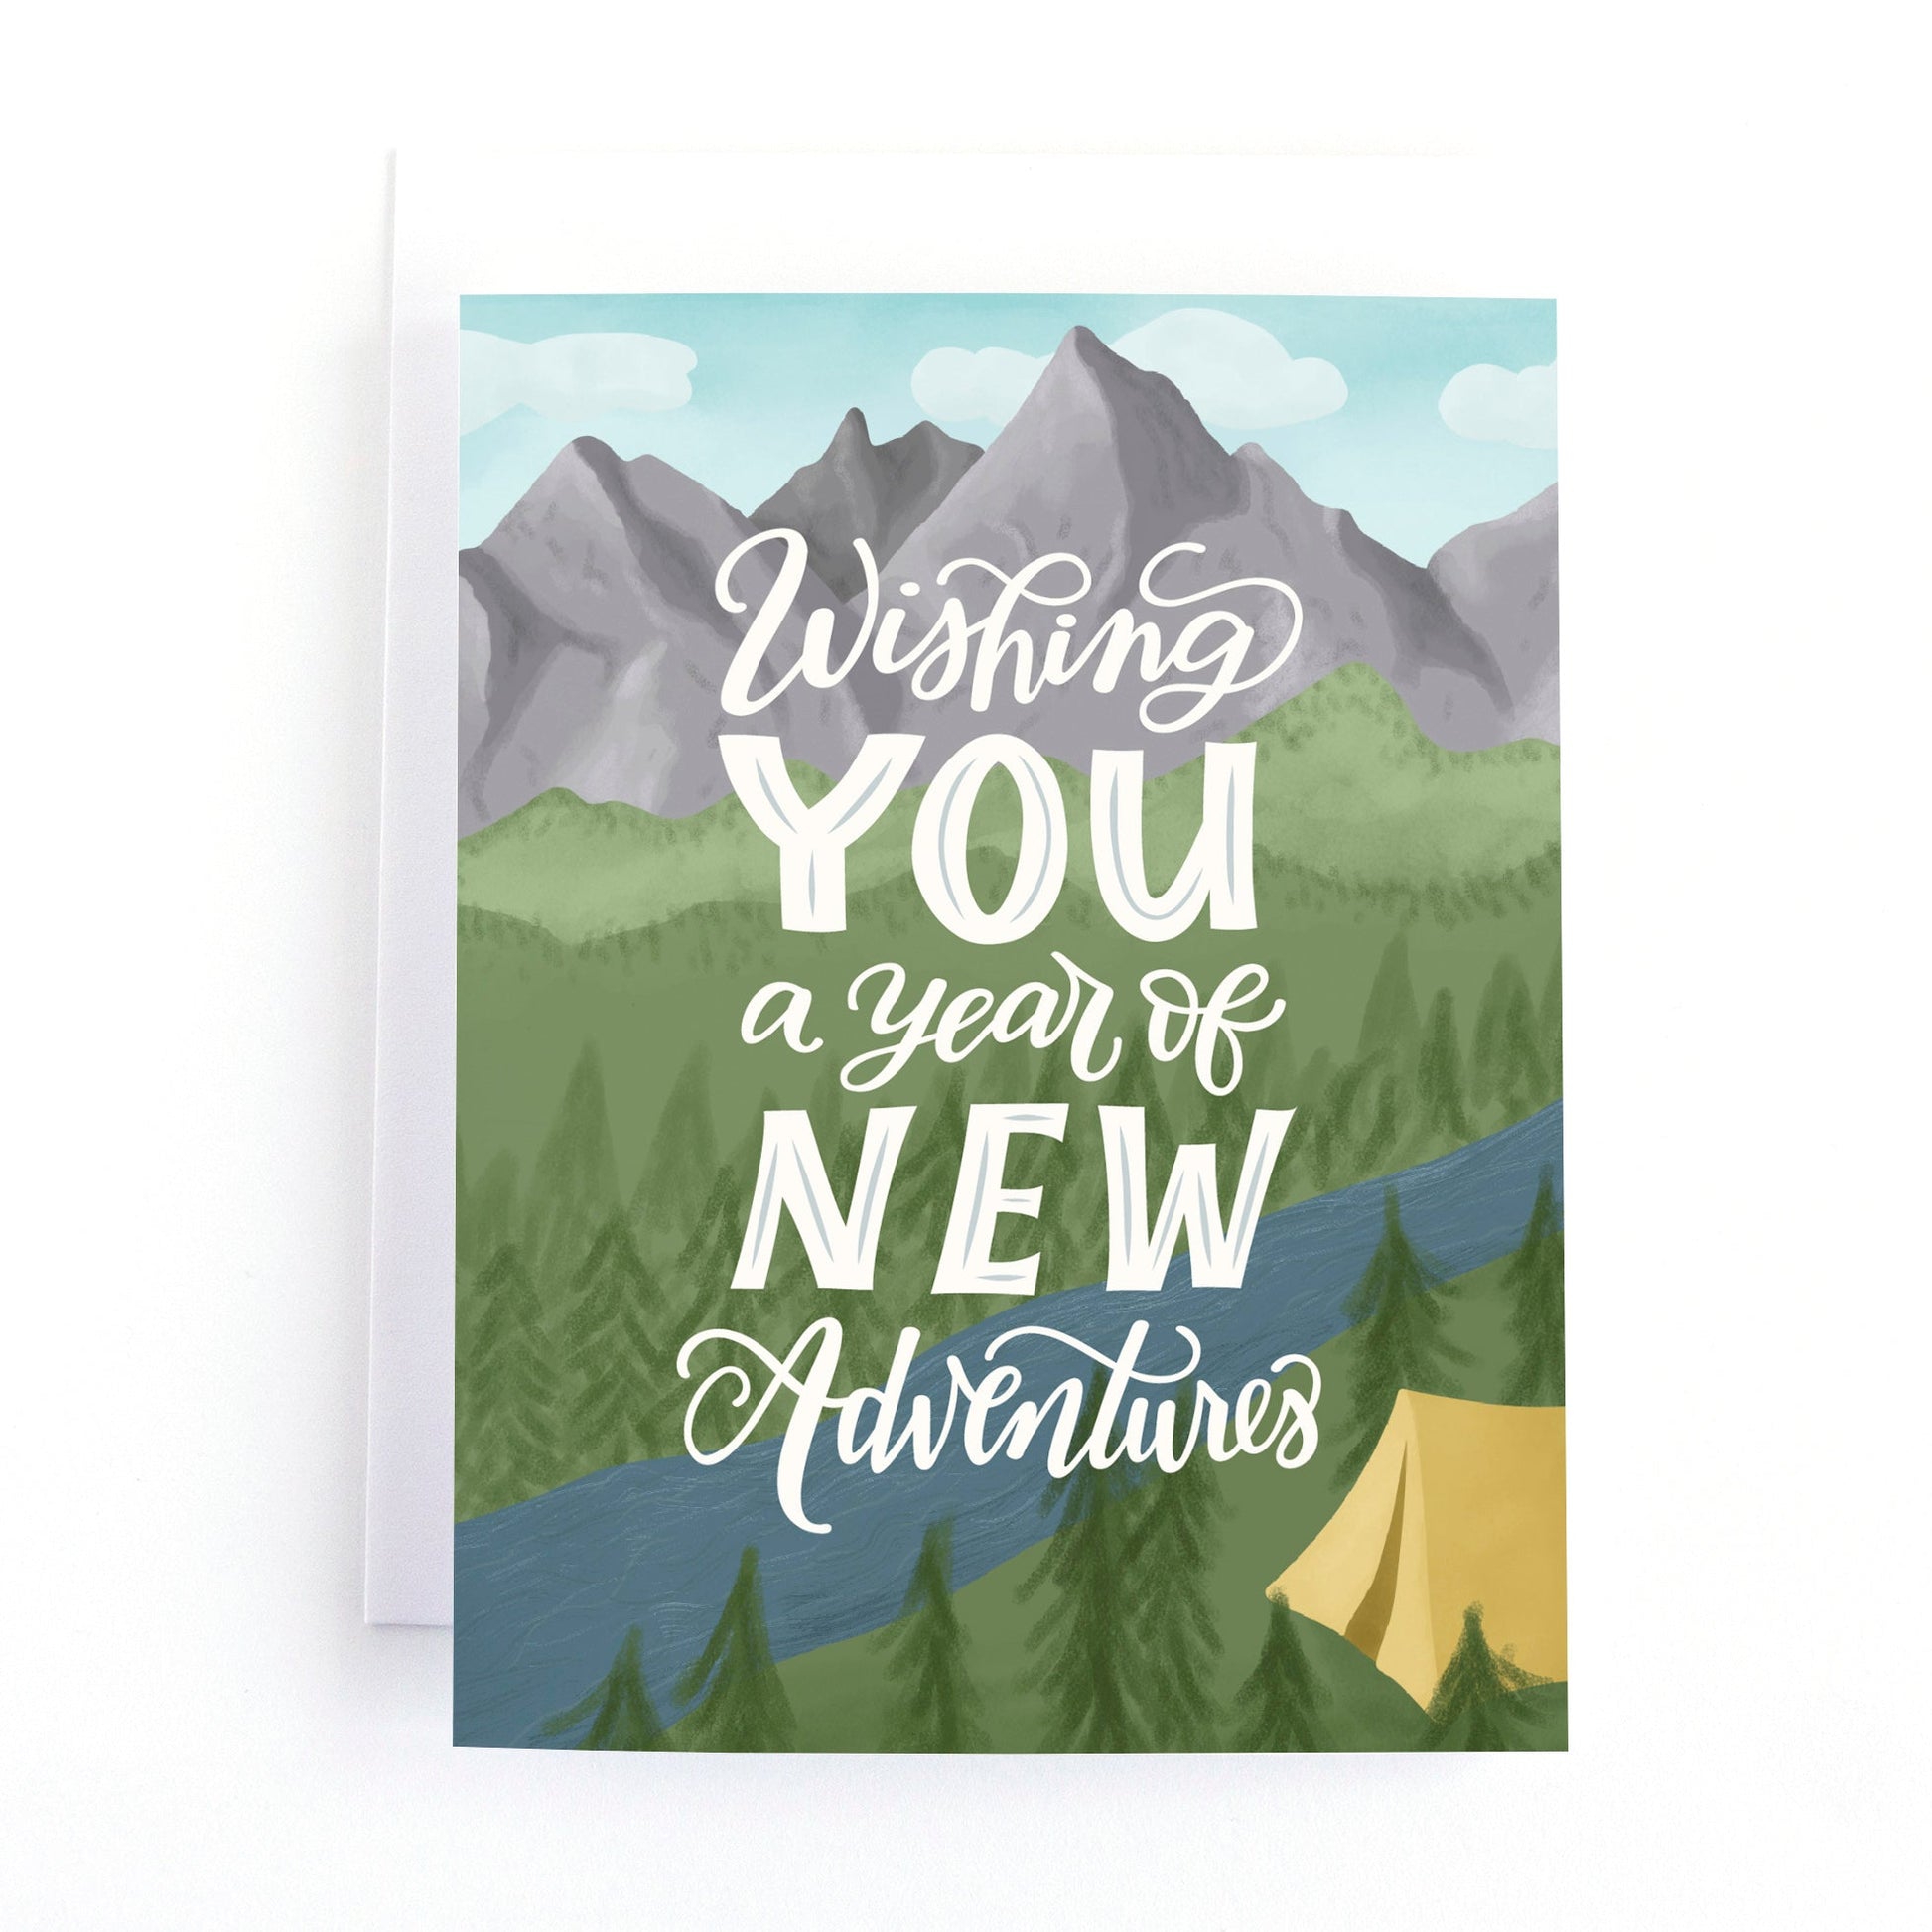 Birthday card featuring a mountain camping scene and the greeting, "wishing you a year of new adventures."